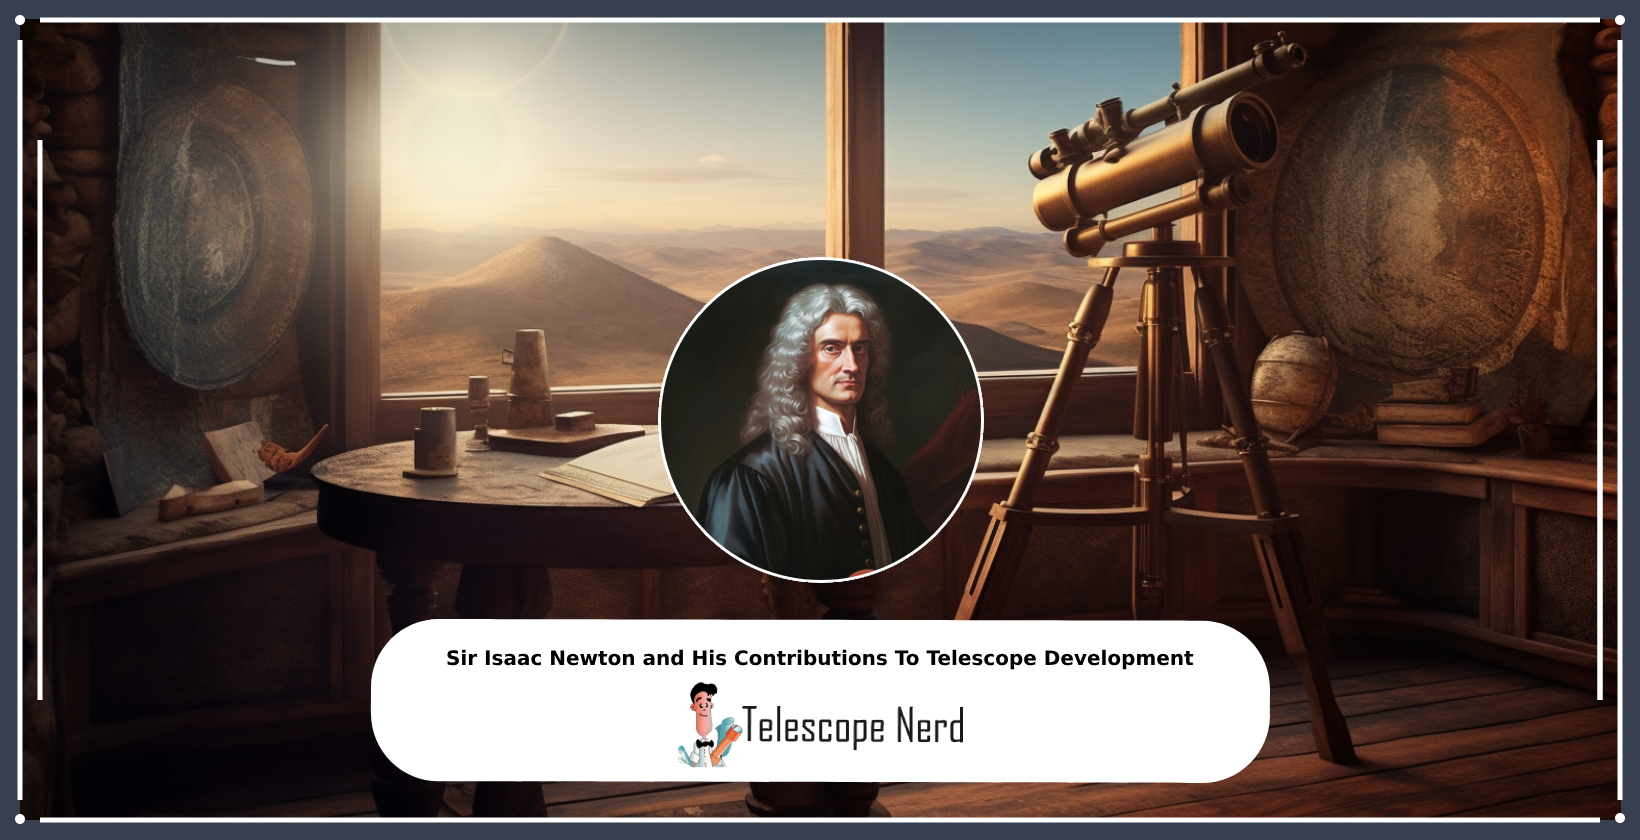 Sir Isaac Newton mathematician and his contributions to telesscope development